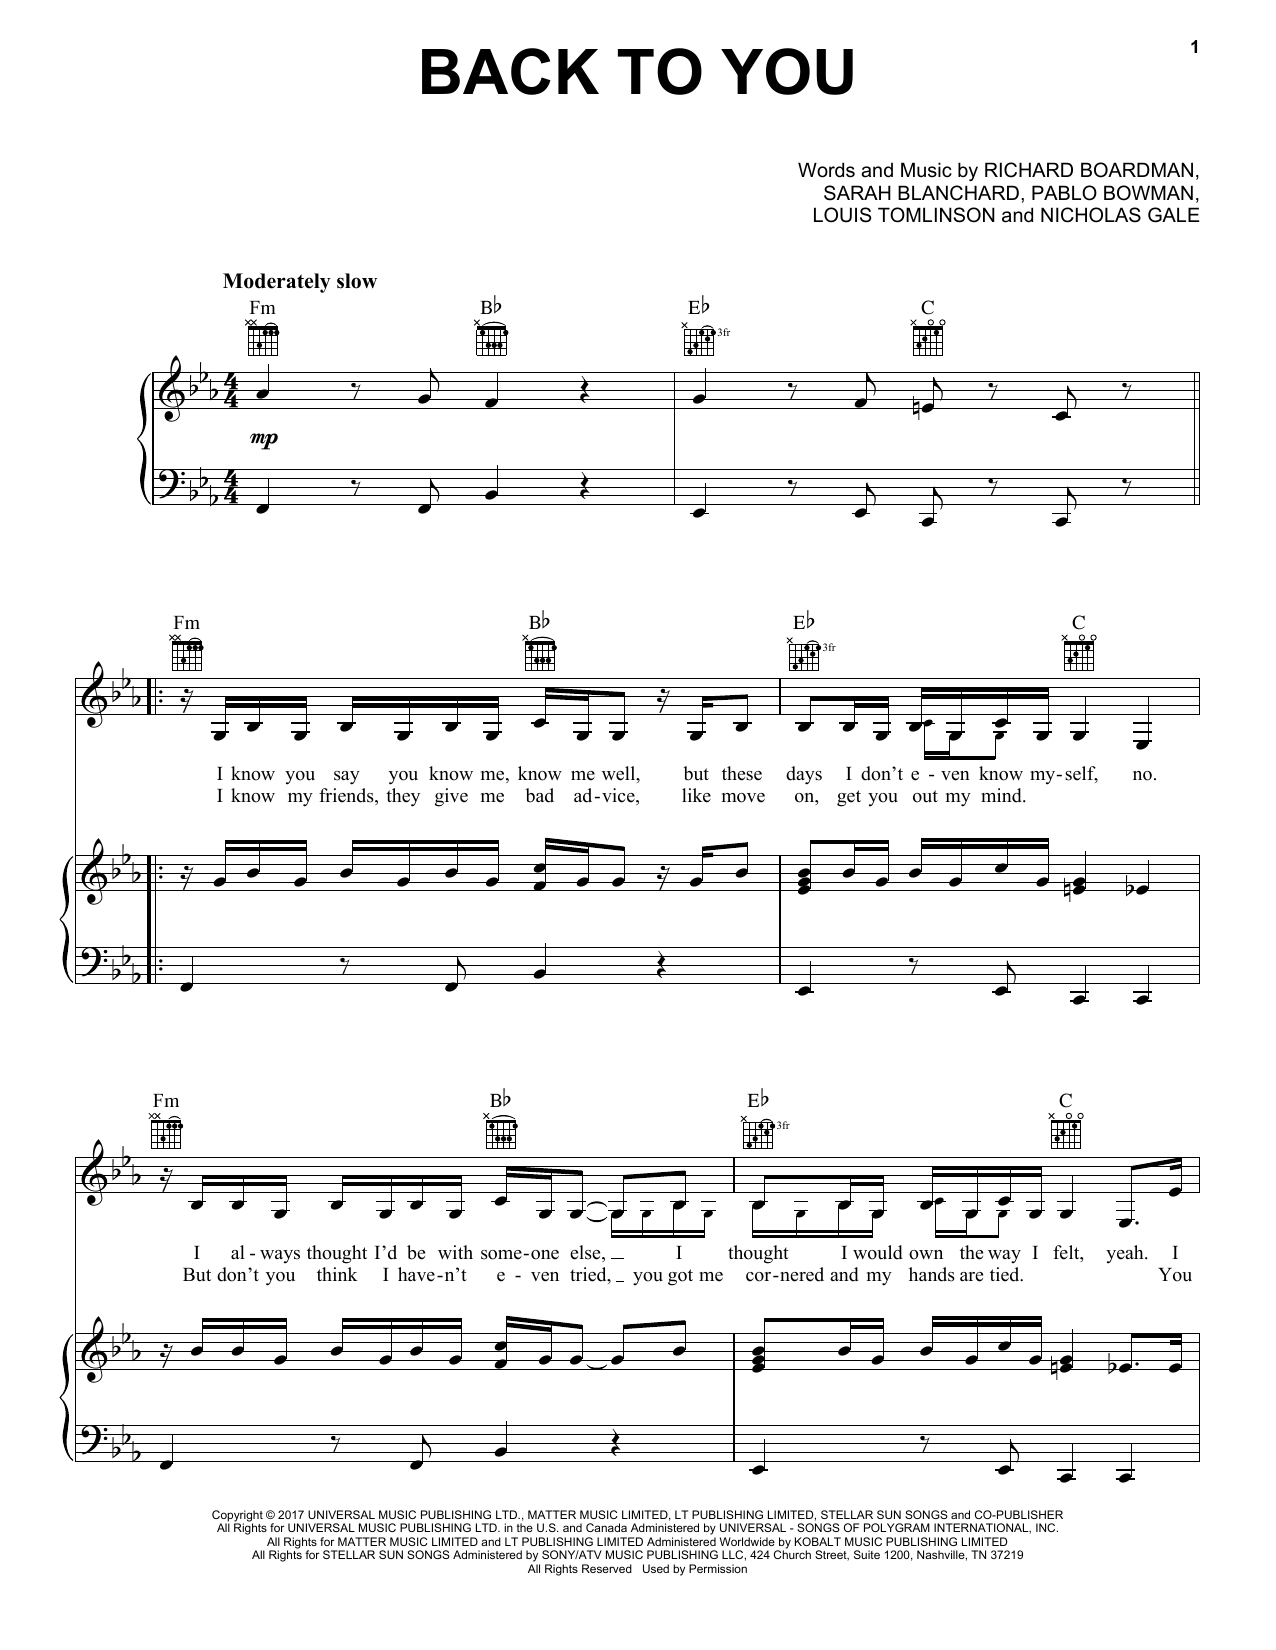 Louis Tomlinson Back To You (feat. Bebe Rexha & Digital Farm Animals) sheet music notes and chords. Download Printable PDF.